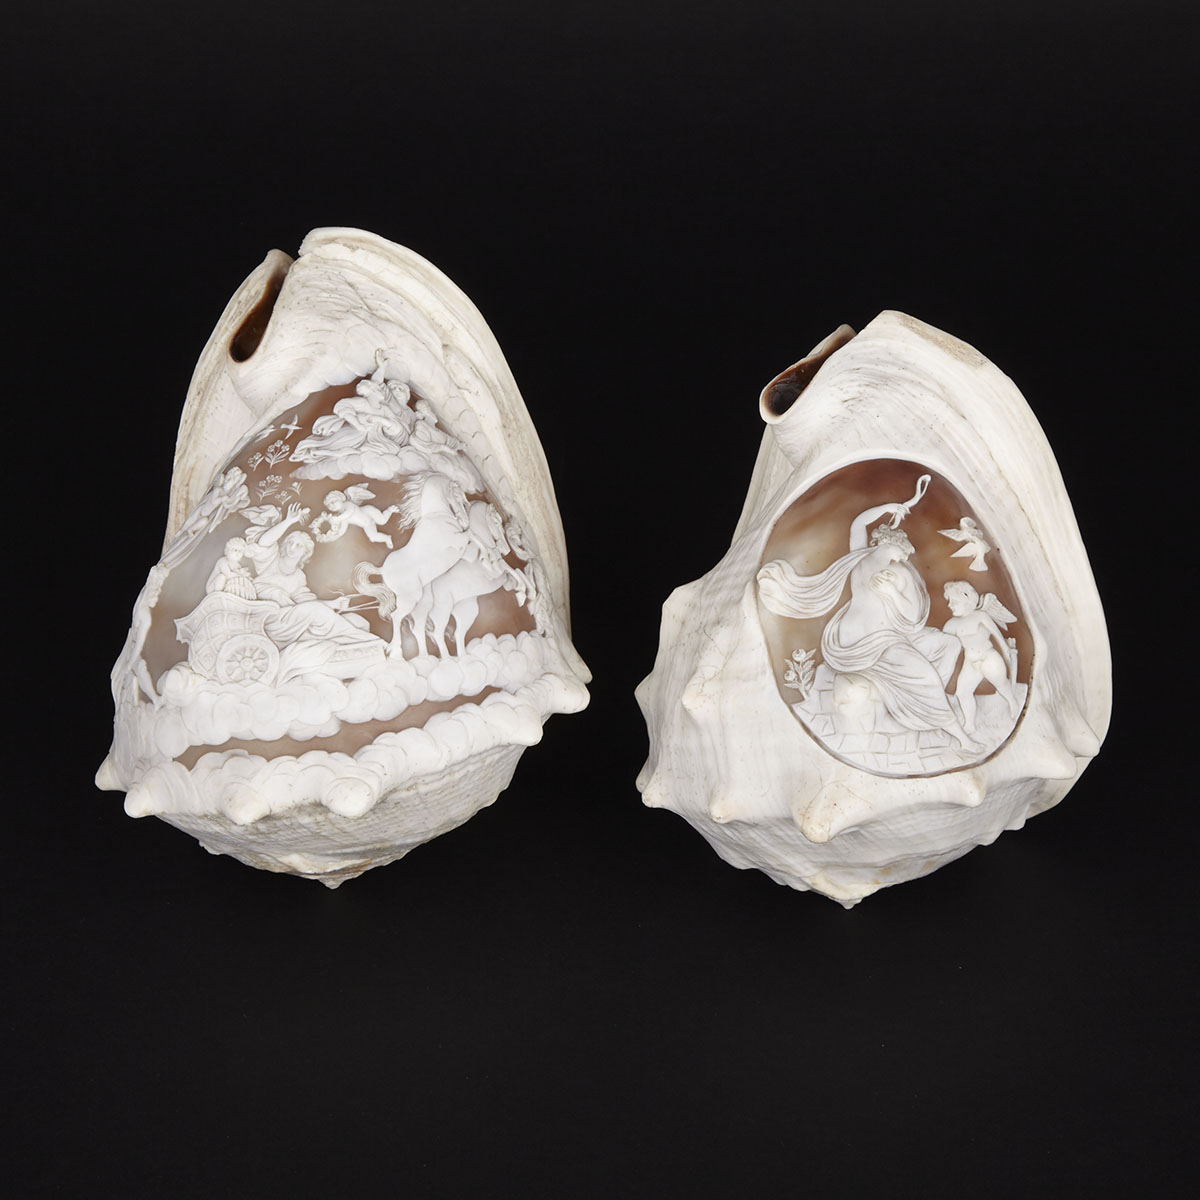 Two Neapolitan Italian Grand Tour Souvenir Cameo Carved Conch Shells, 19th/early 20th century